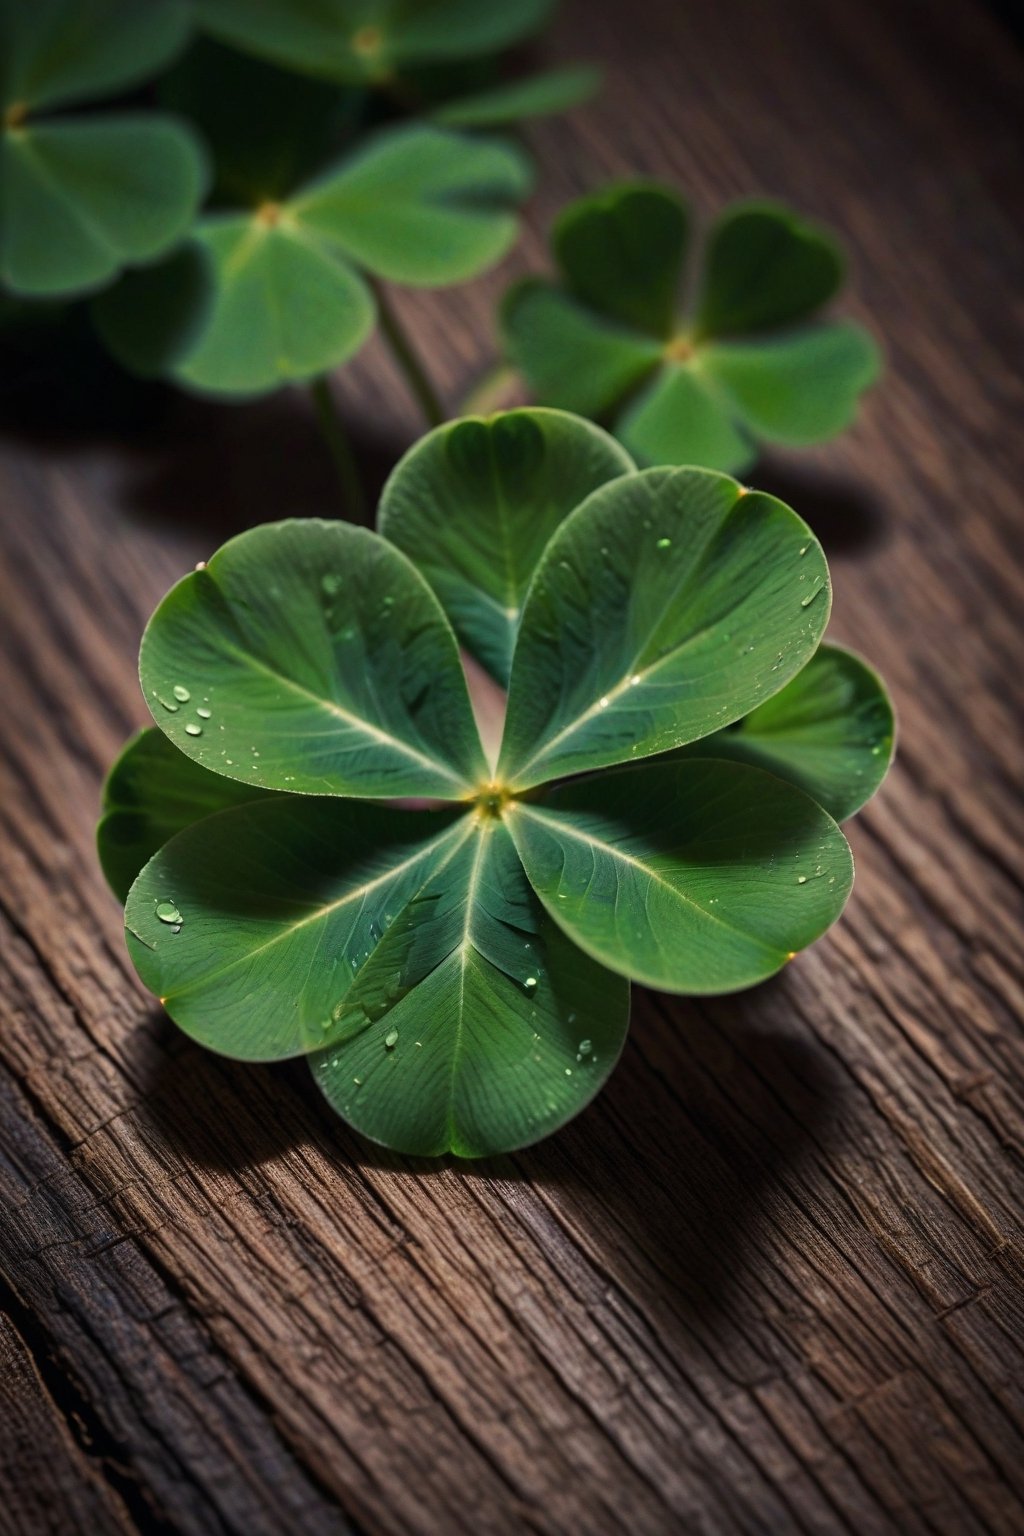 Four-leaf clover gives off magical light and brings good luck.